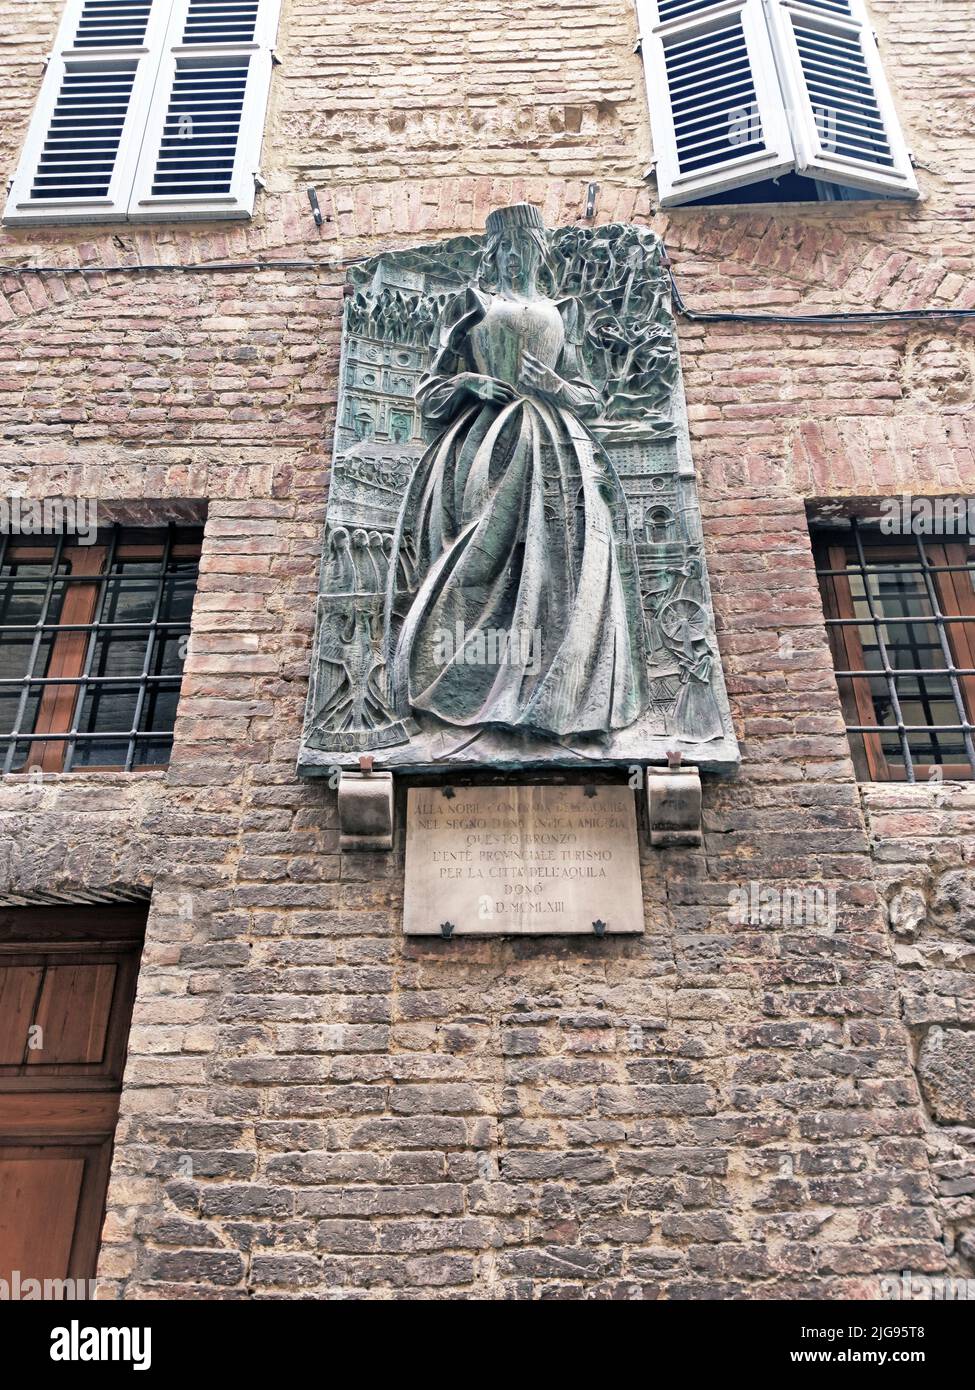 literal translation: 'to the noble district of the eagle in the sign of an antica friendship this bronze of the provincial tourist board for the city of Aquila gift MCMLXIII', Siena Stock Photo